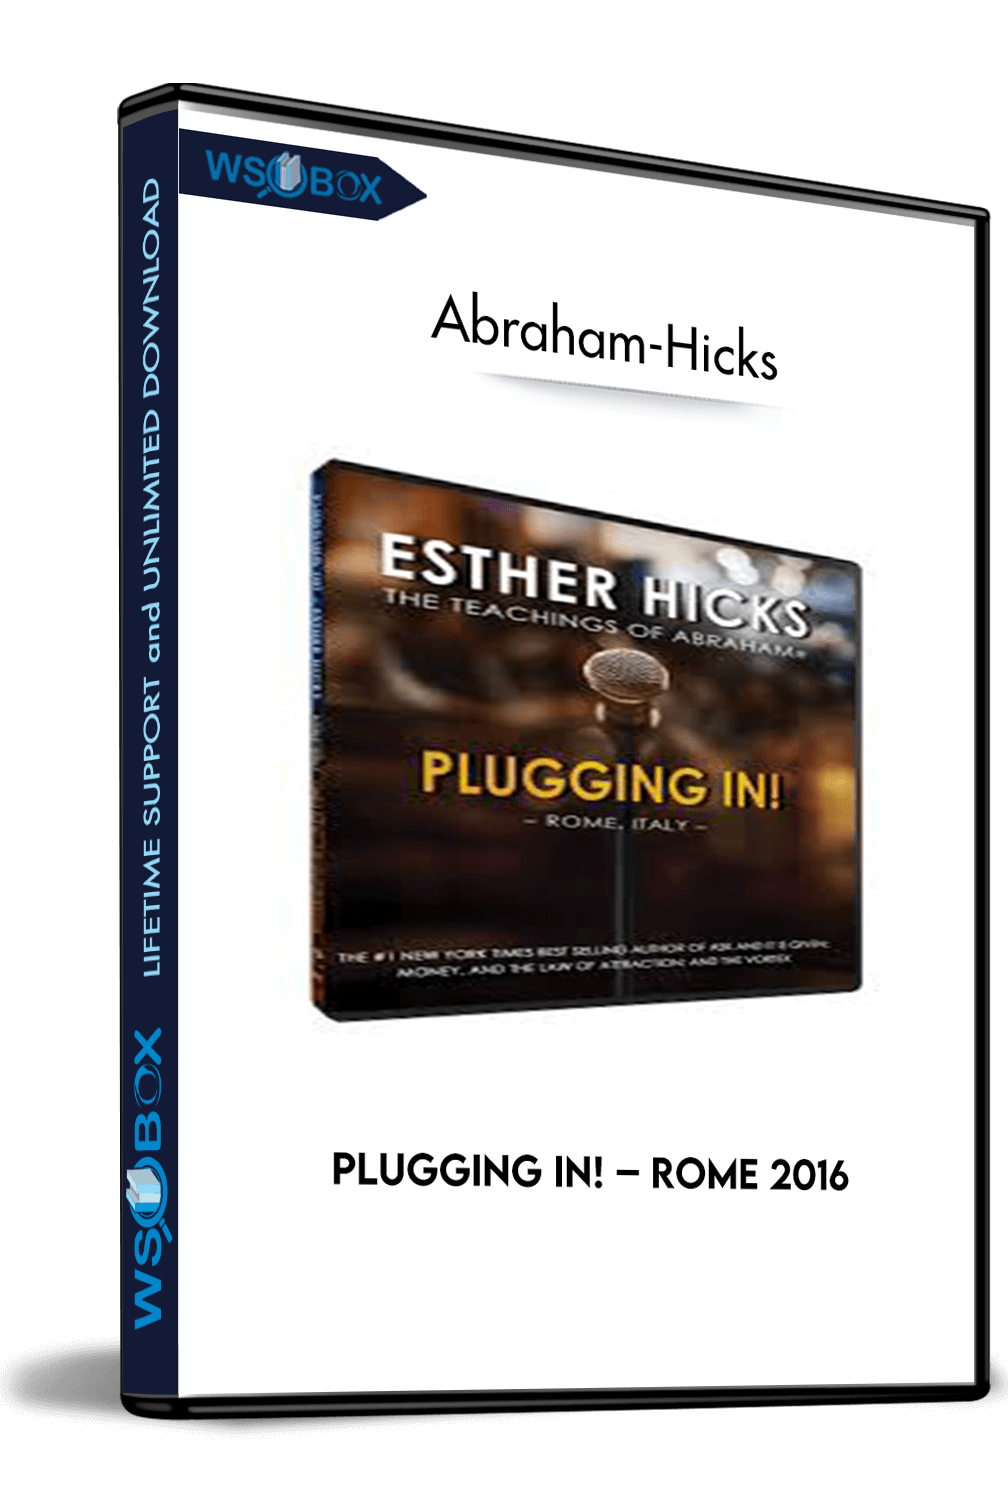 plugging-in-rome-2016-abraham-hicks